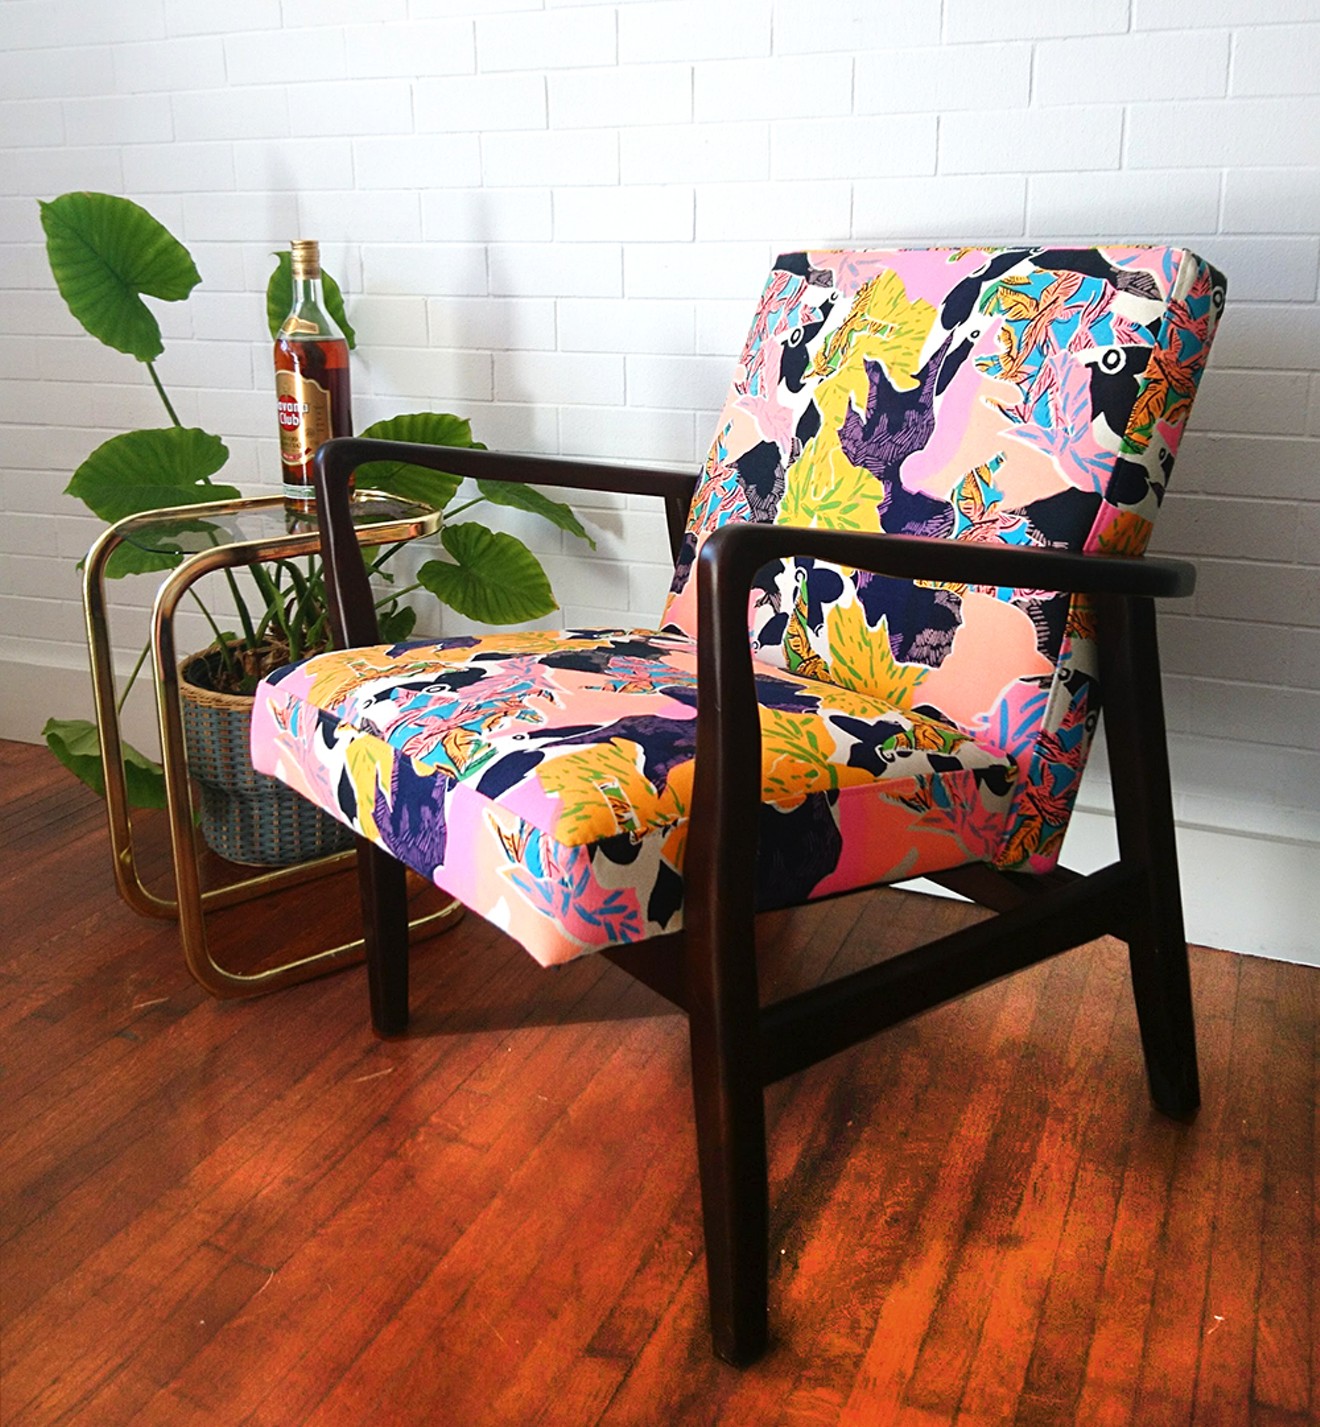 A midcentury chair reupholstered in a Tranqui Prints custom fabric.